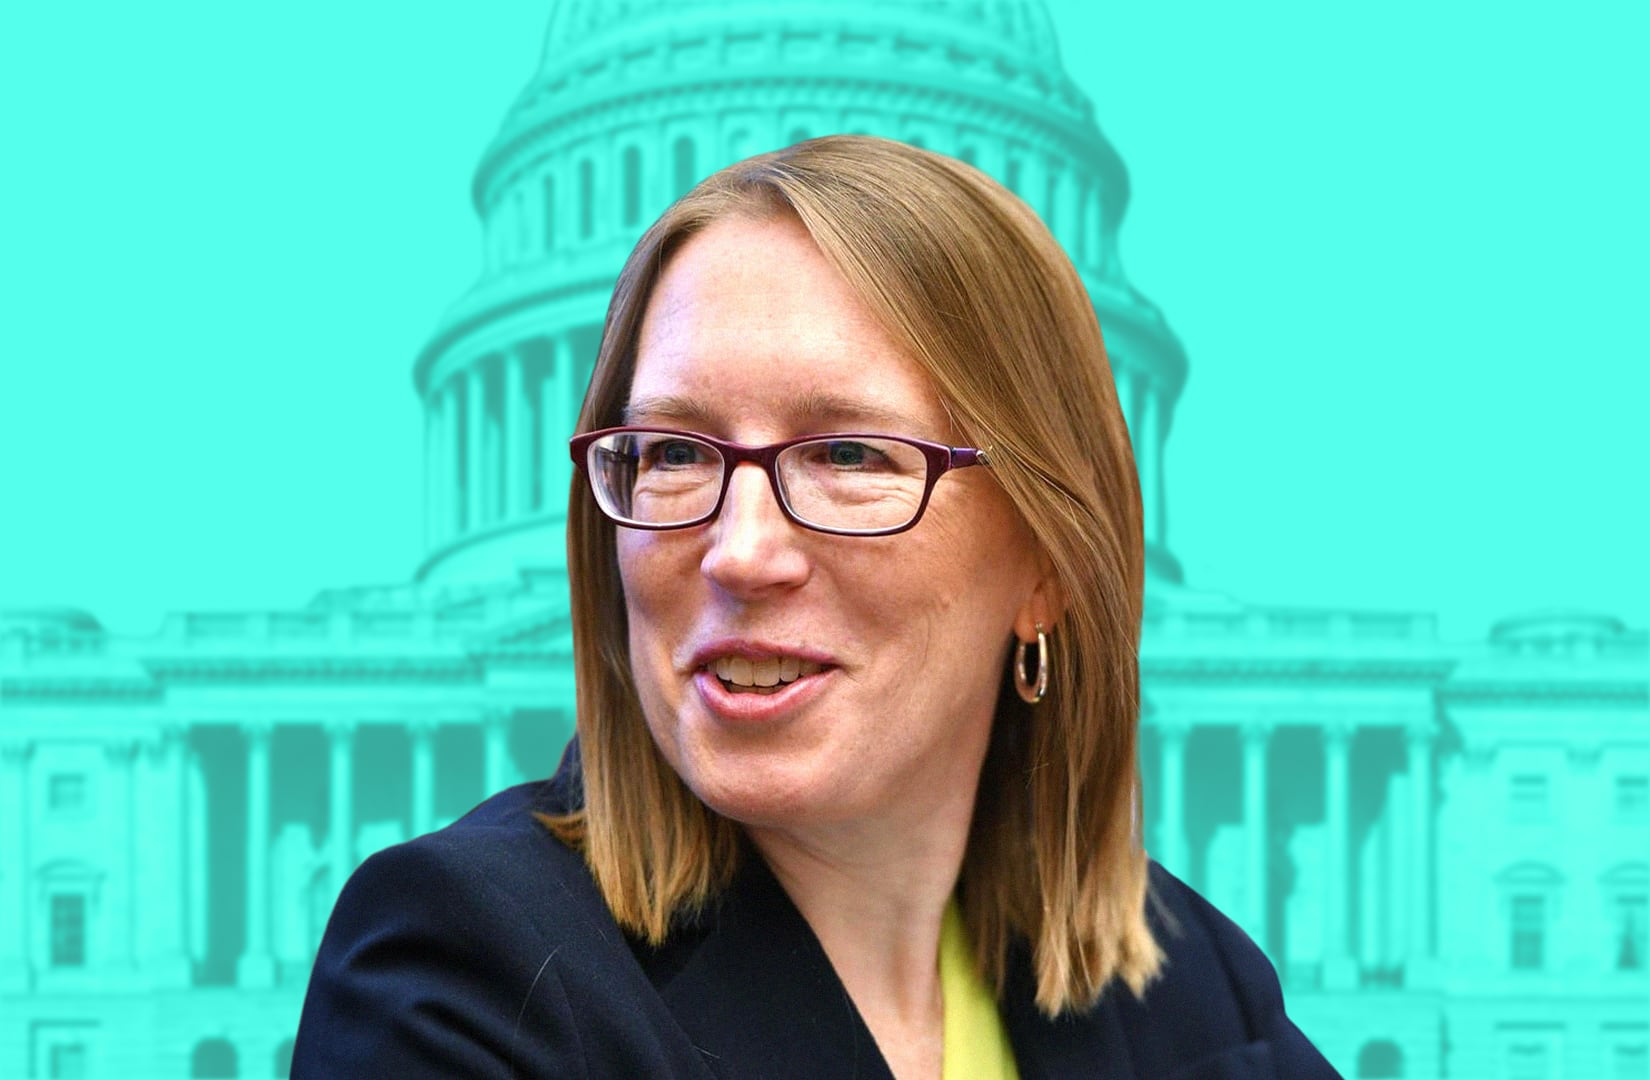 SEC Commissioner Hester Peirce tells crypto: ‘I’m not your mom’